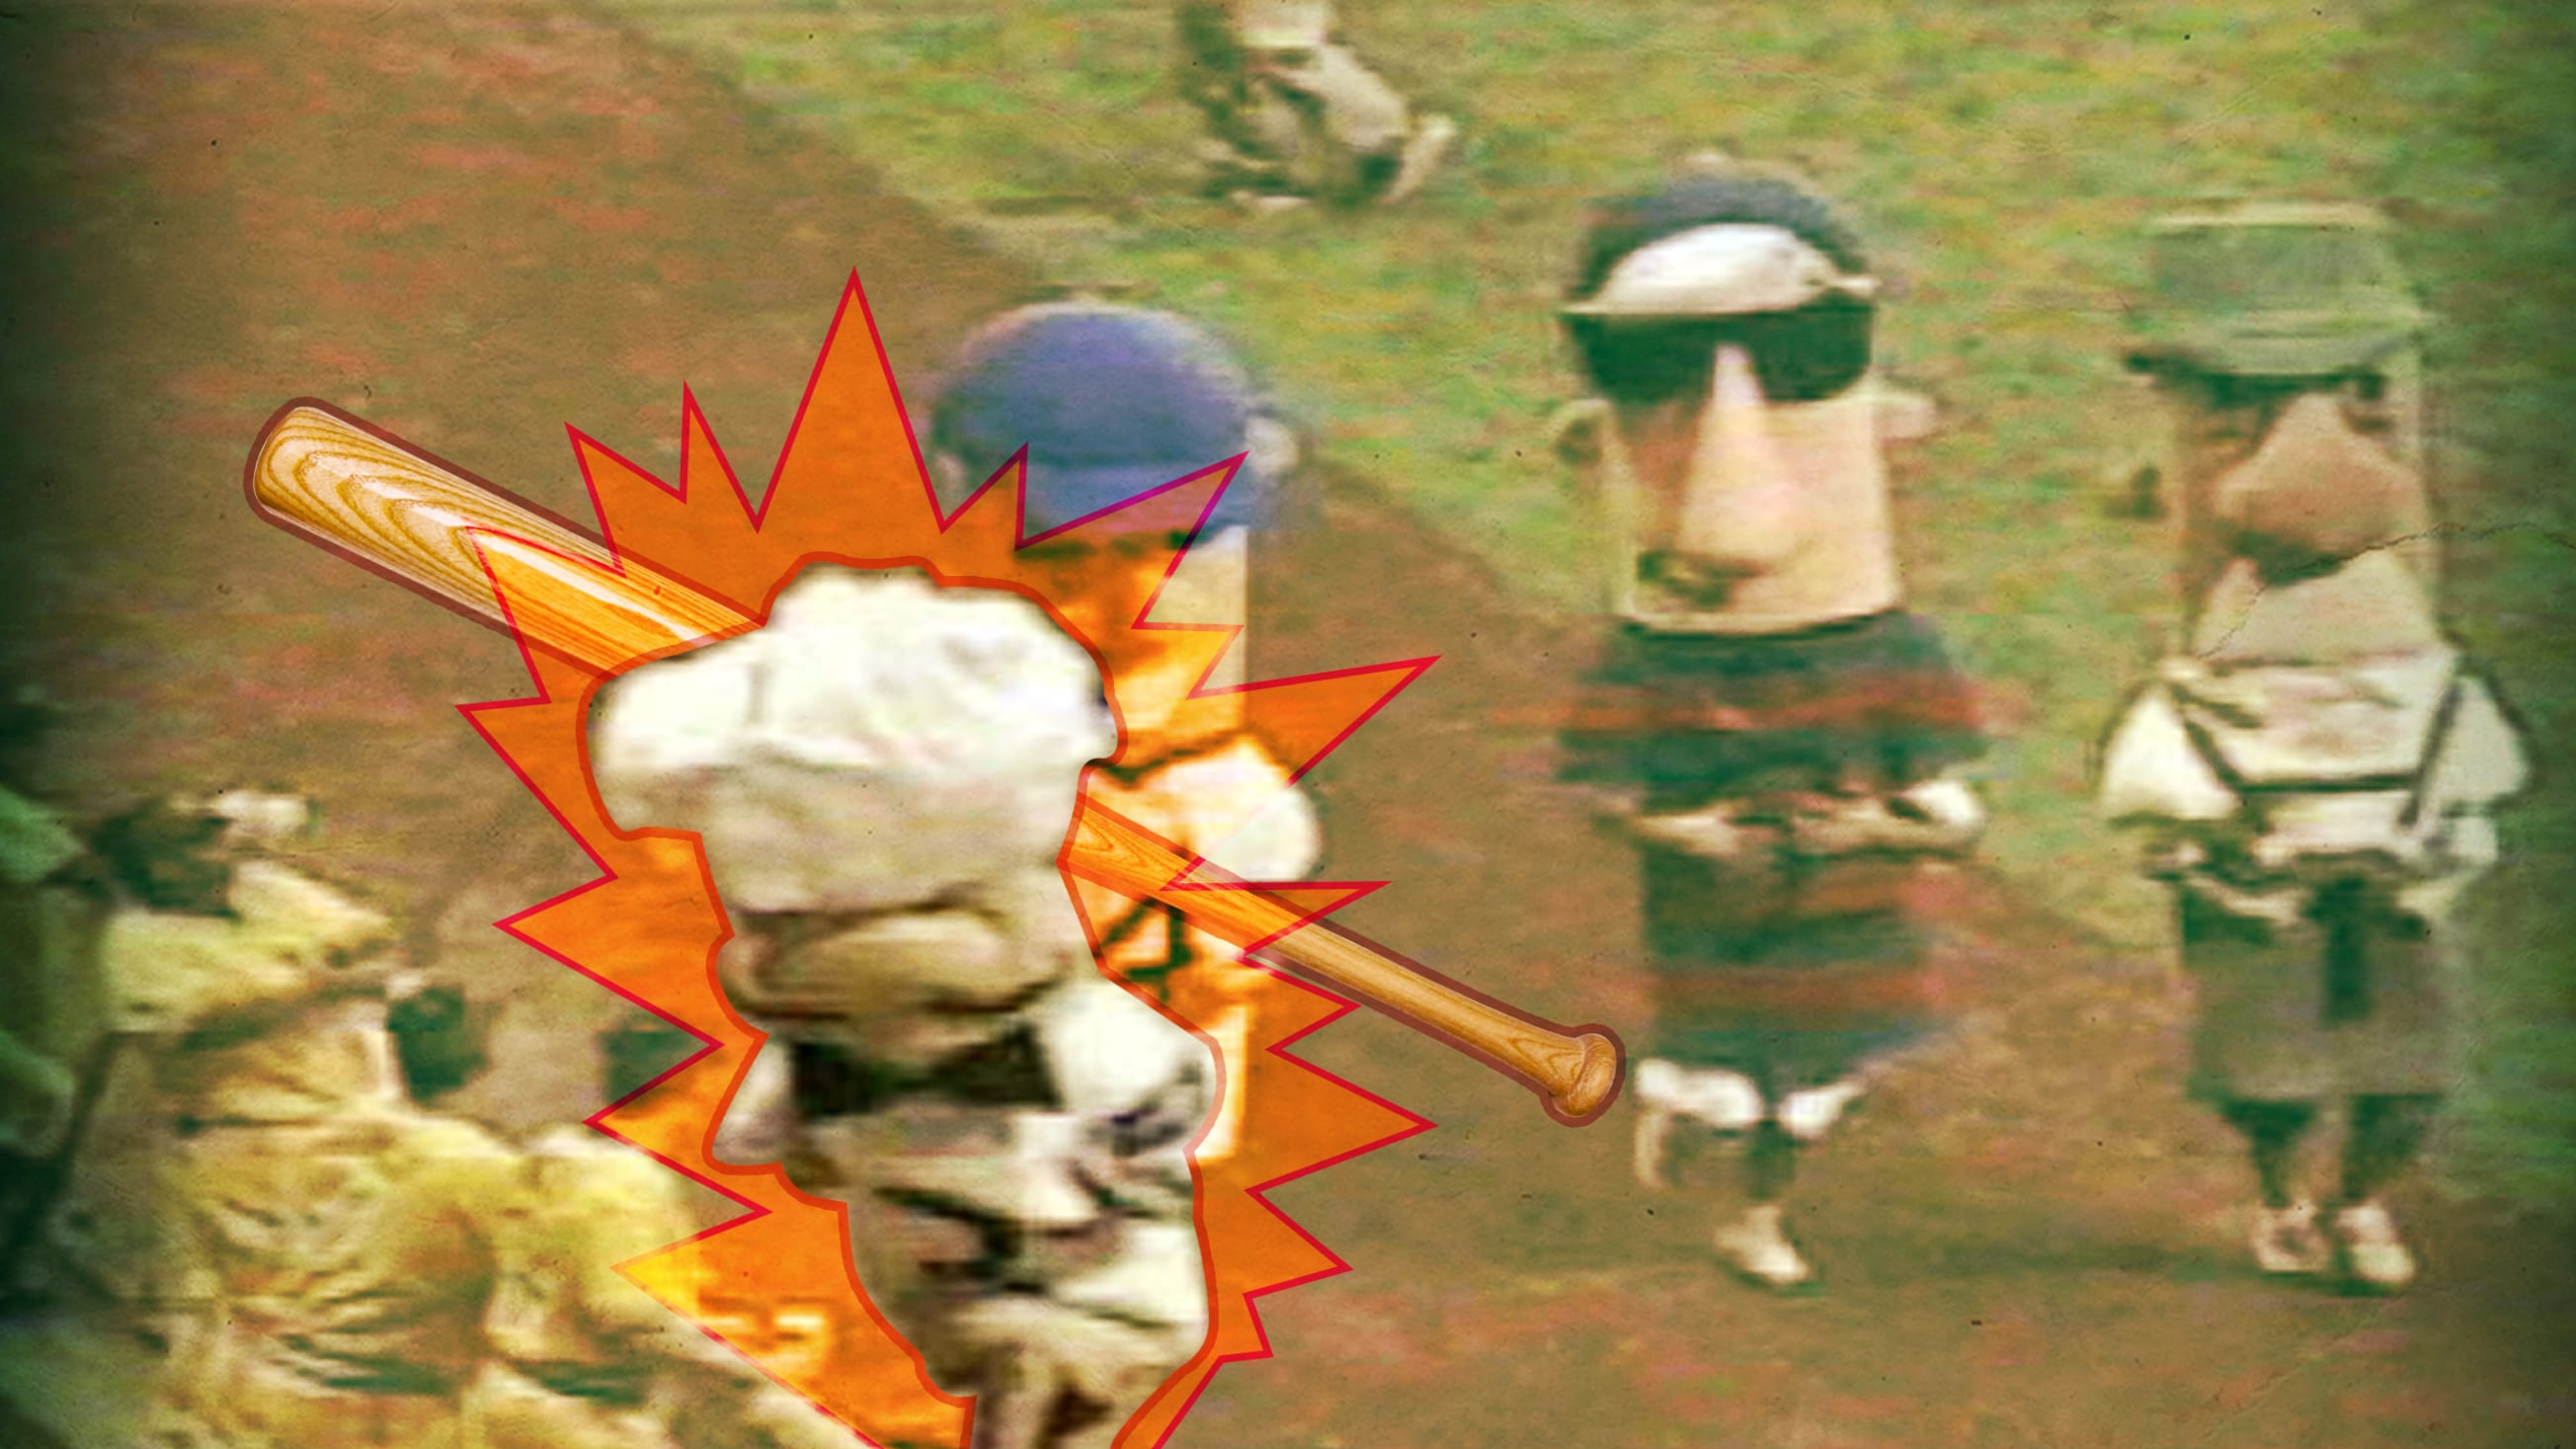 The sausage race at the Brewers game is always hilarious. Chorizo was